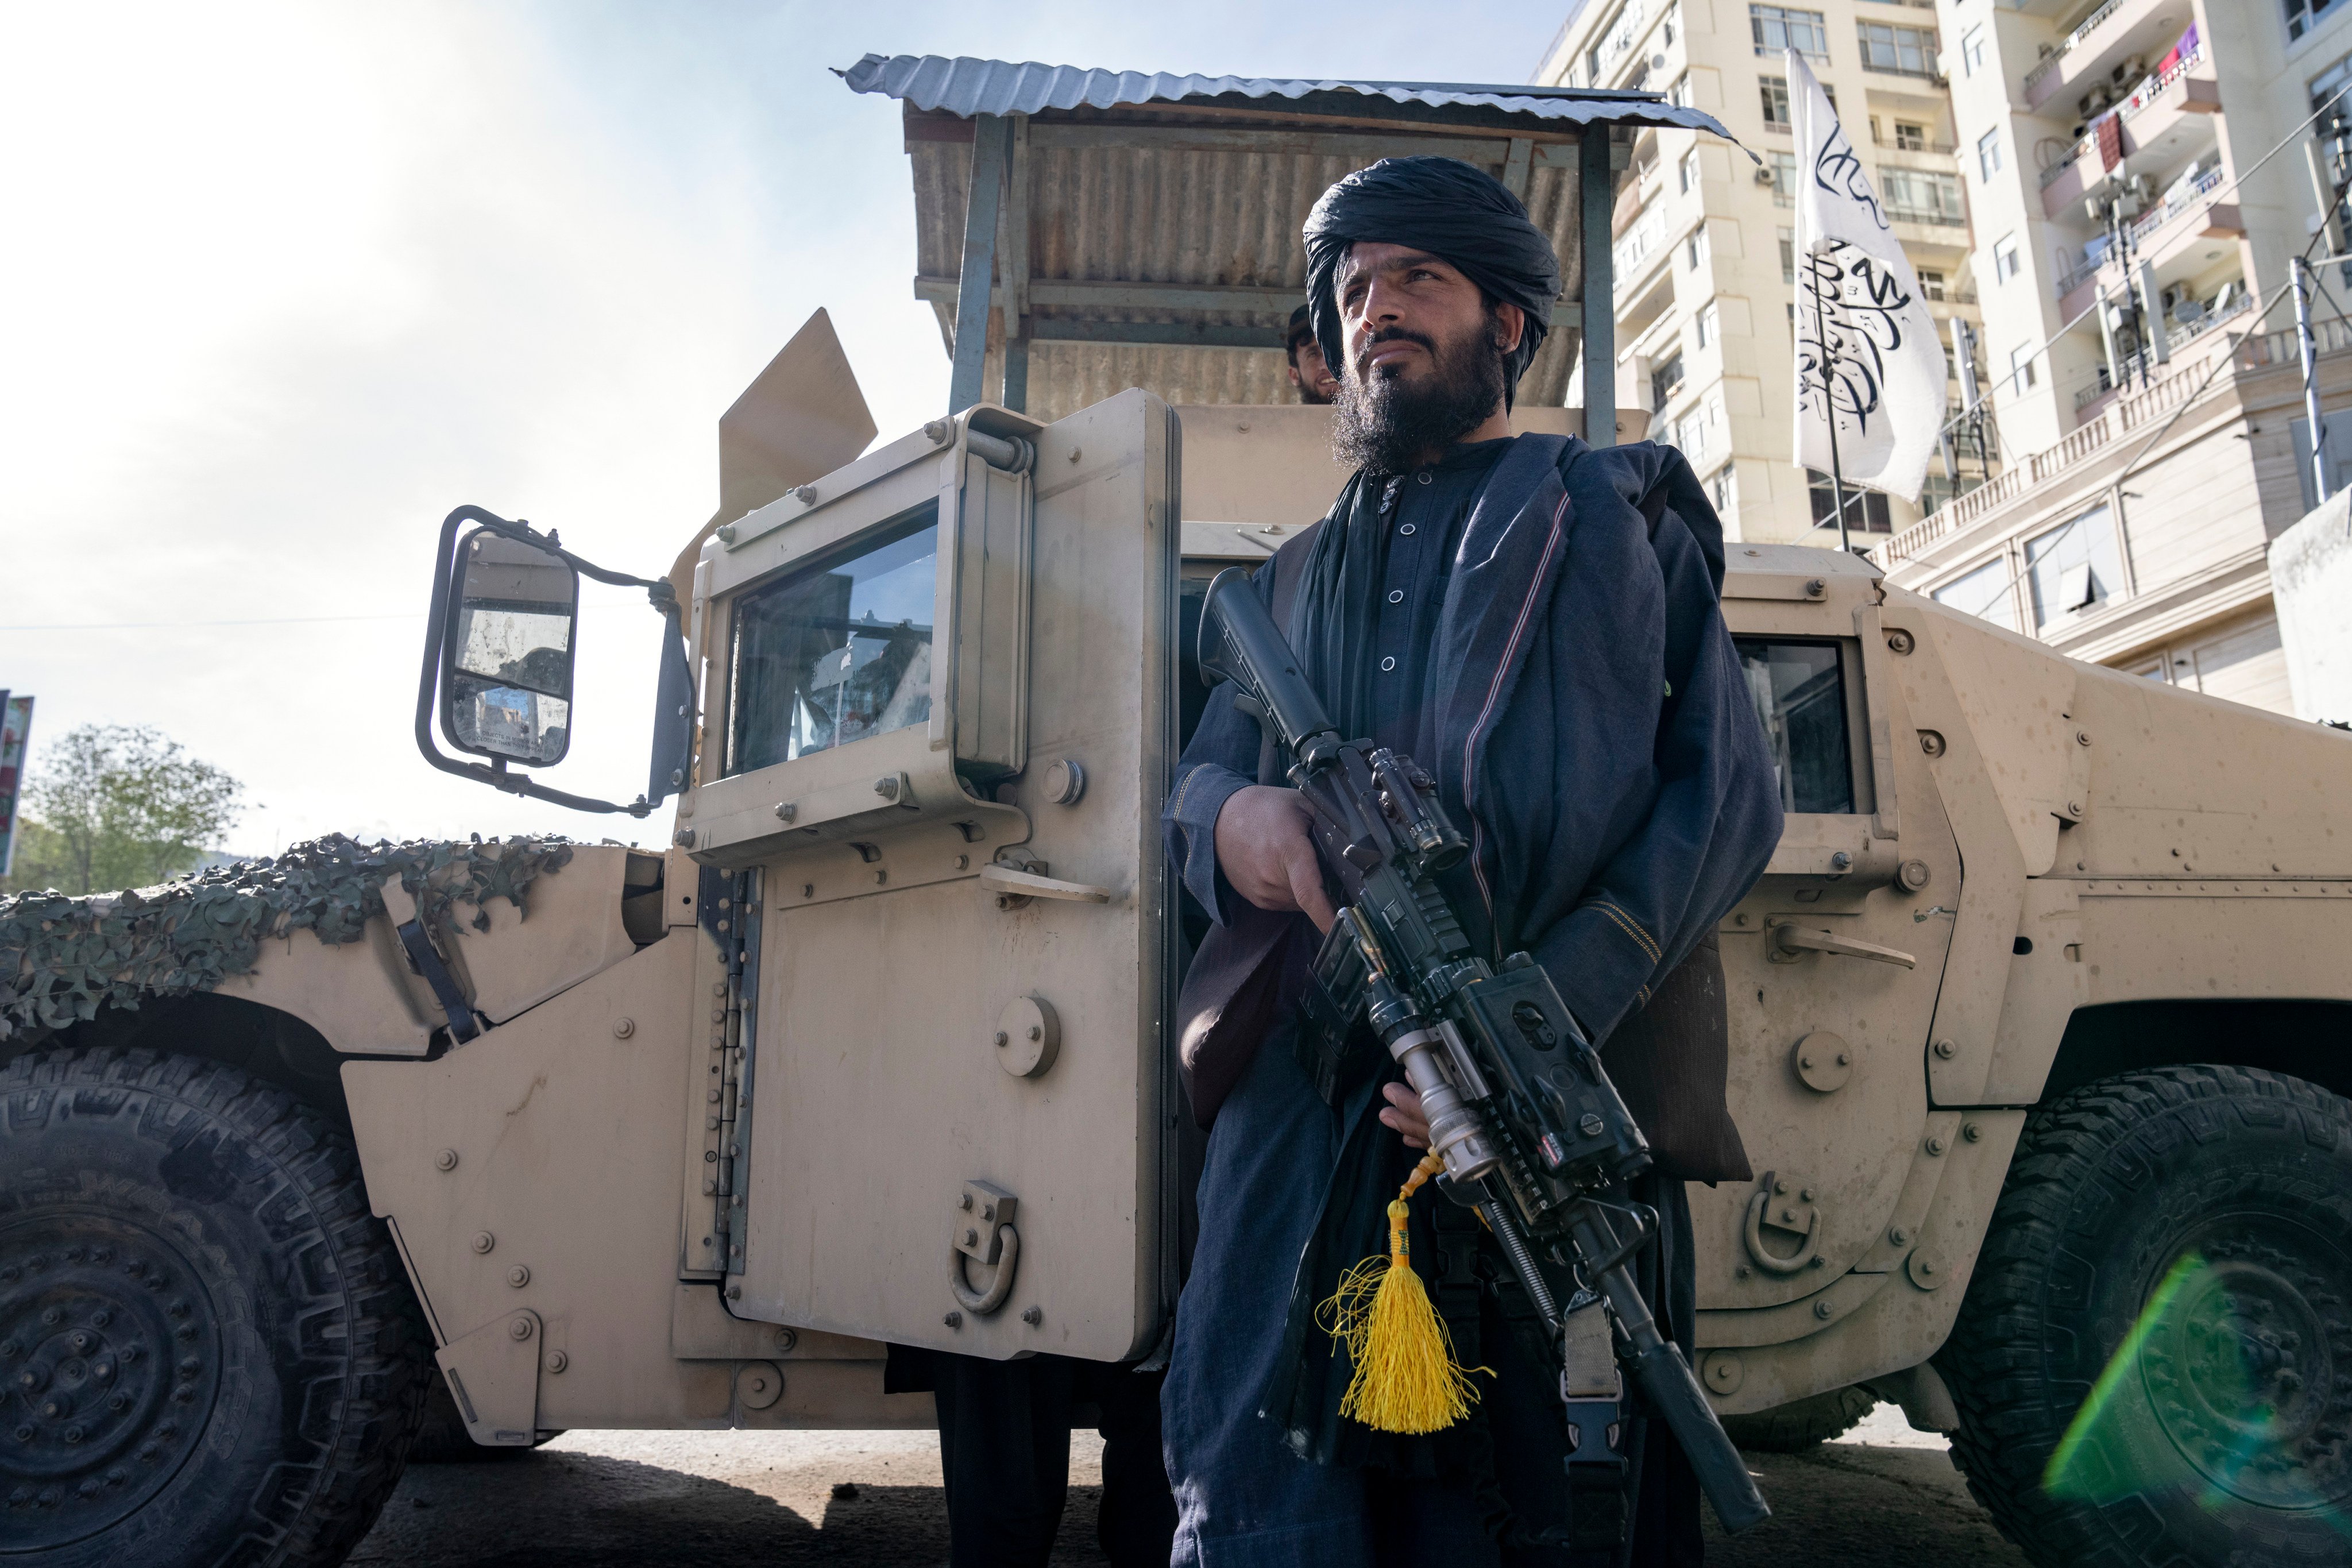 A Taliban fighter stands guard near the Foreign Ministry in Kabul, Afghanistan on Monday. Three British men have been detained by the Taliban in Afghanistan, it was reported on Saturday. Photo: AP 